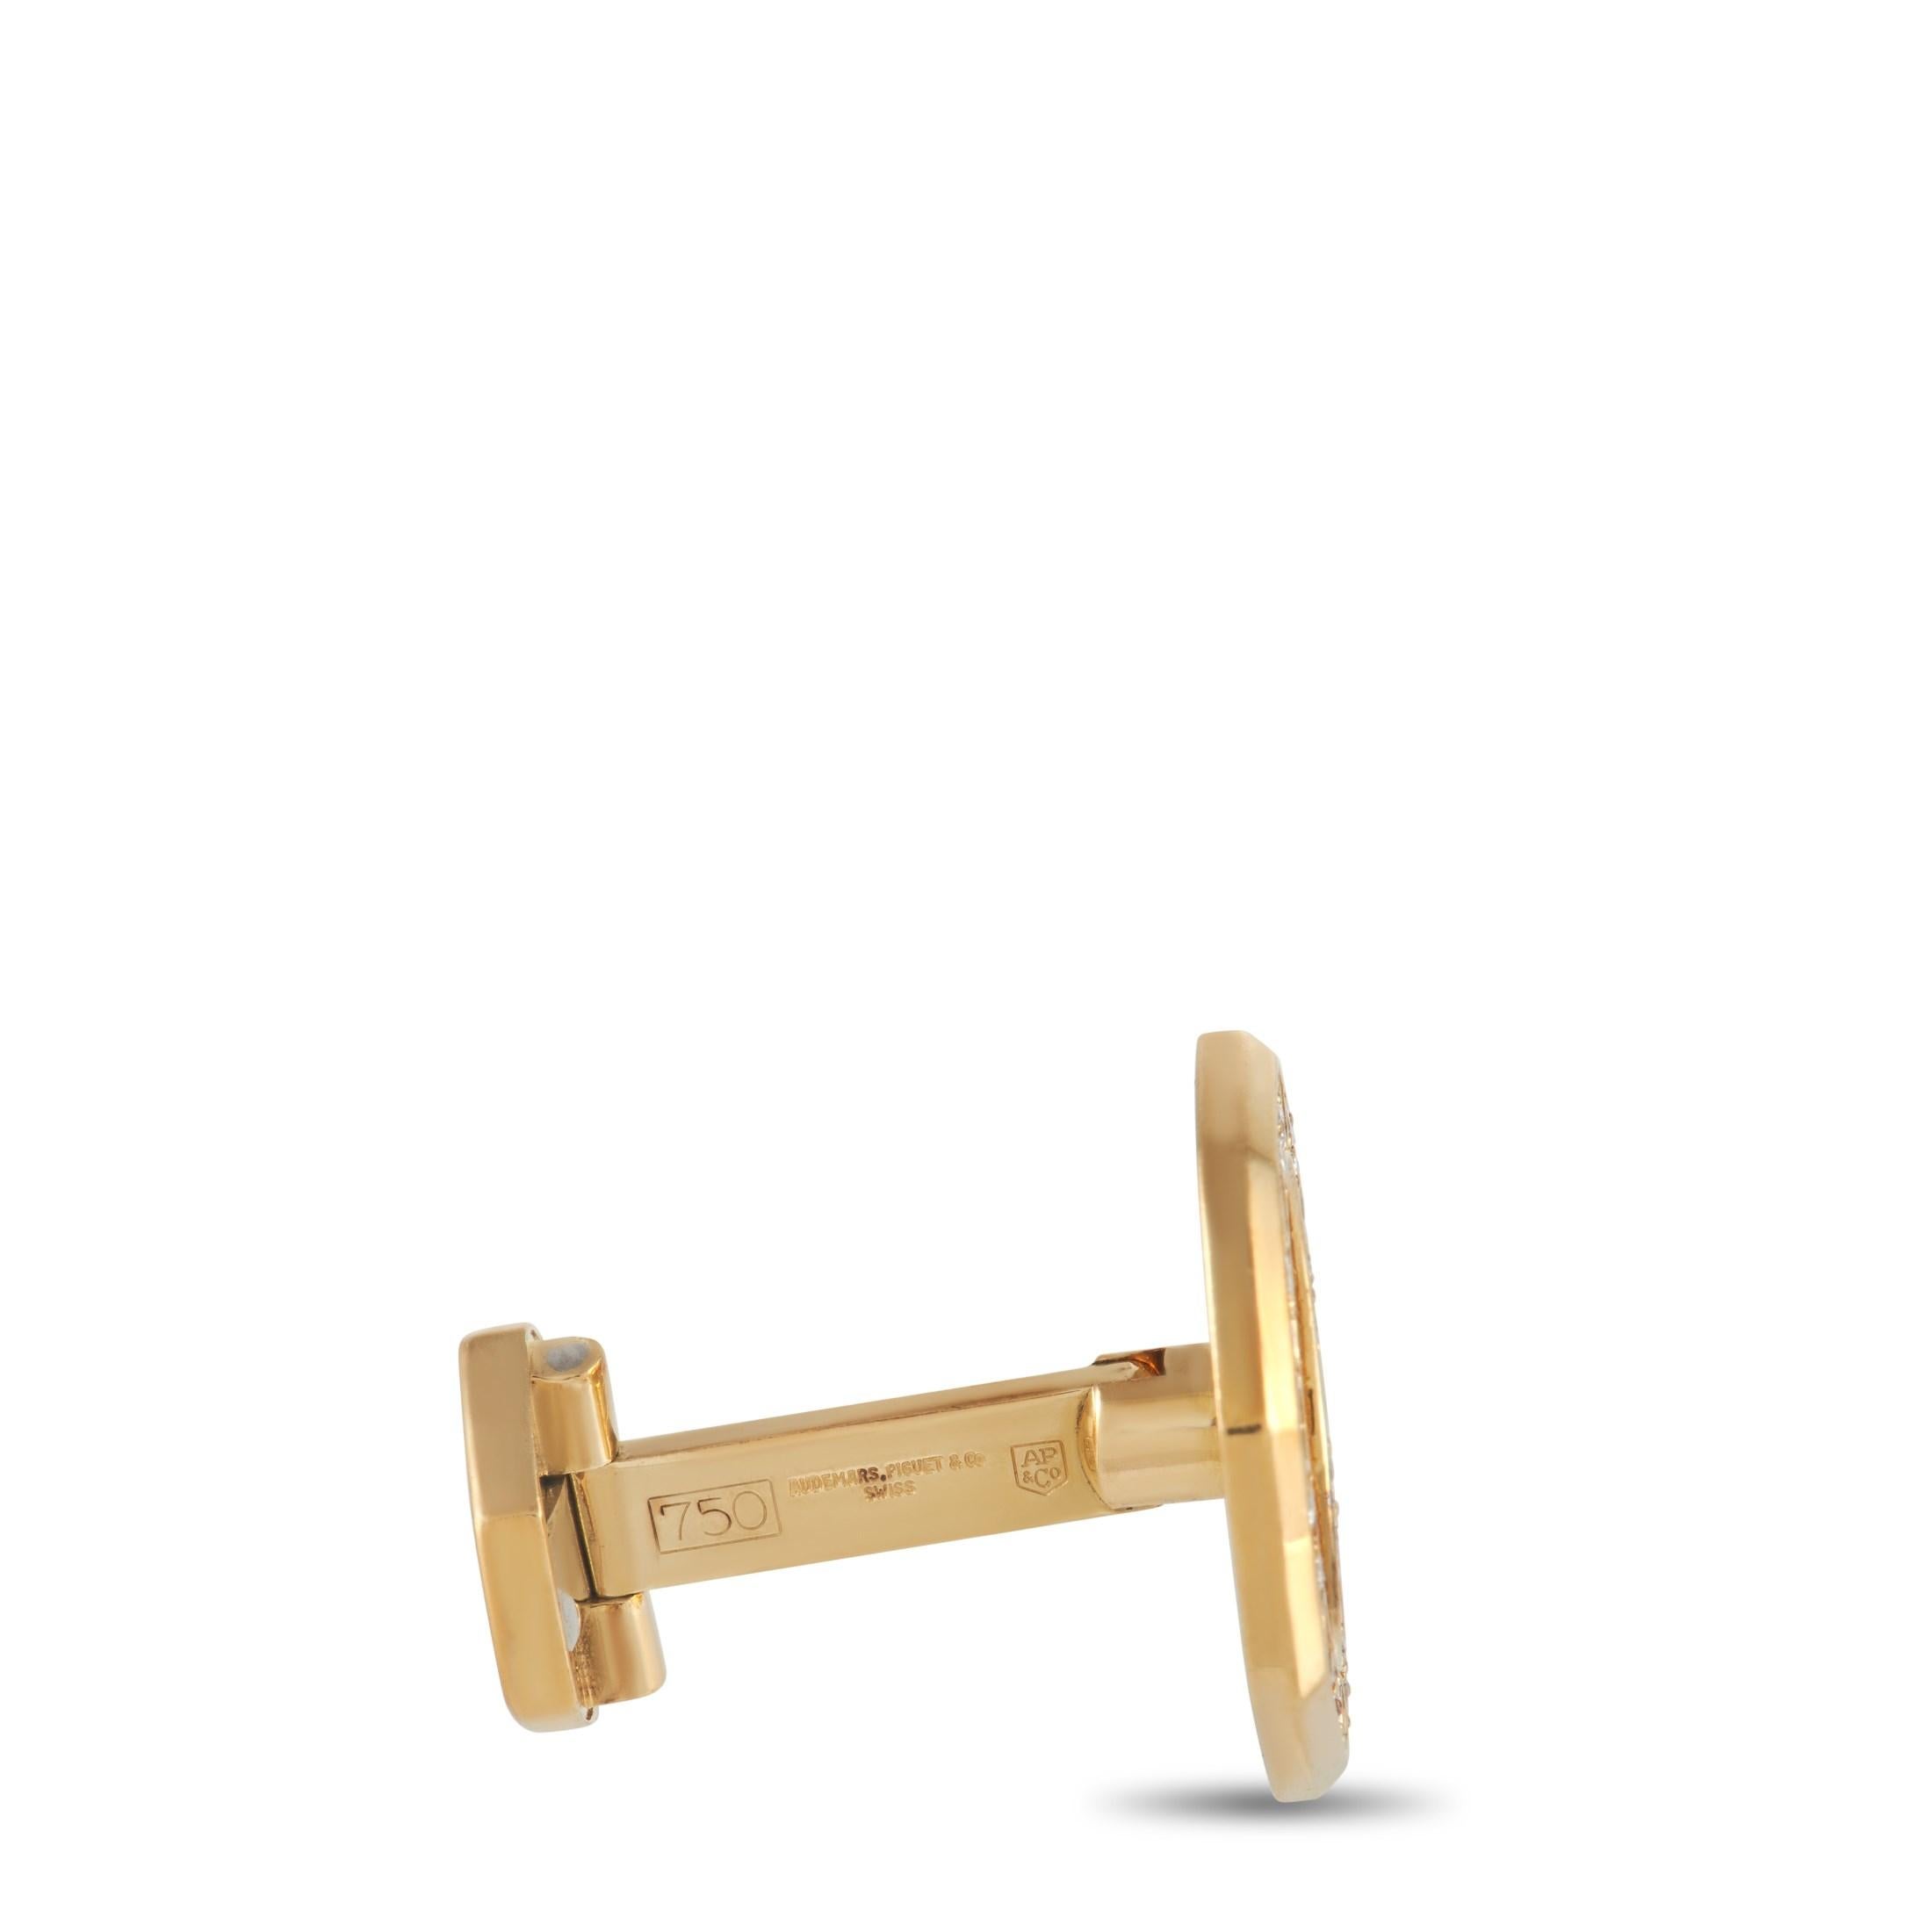 Inspired by the iconic Audemars Piguet bezel is this pair of cufflinks for men. Each is fashioned from solid 18K yellow gold and is octagonal in shape with polished beveled corners. The cufflinks come with a diamond cluster center encircled by an